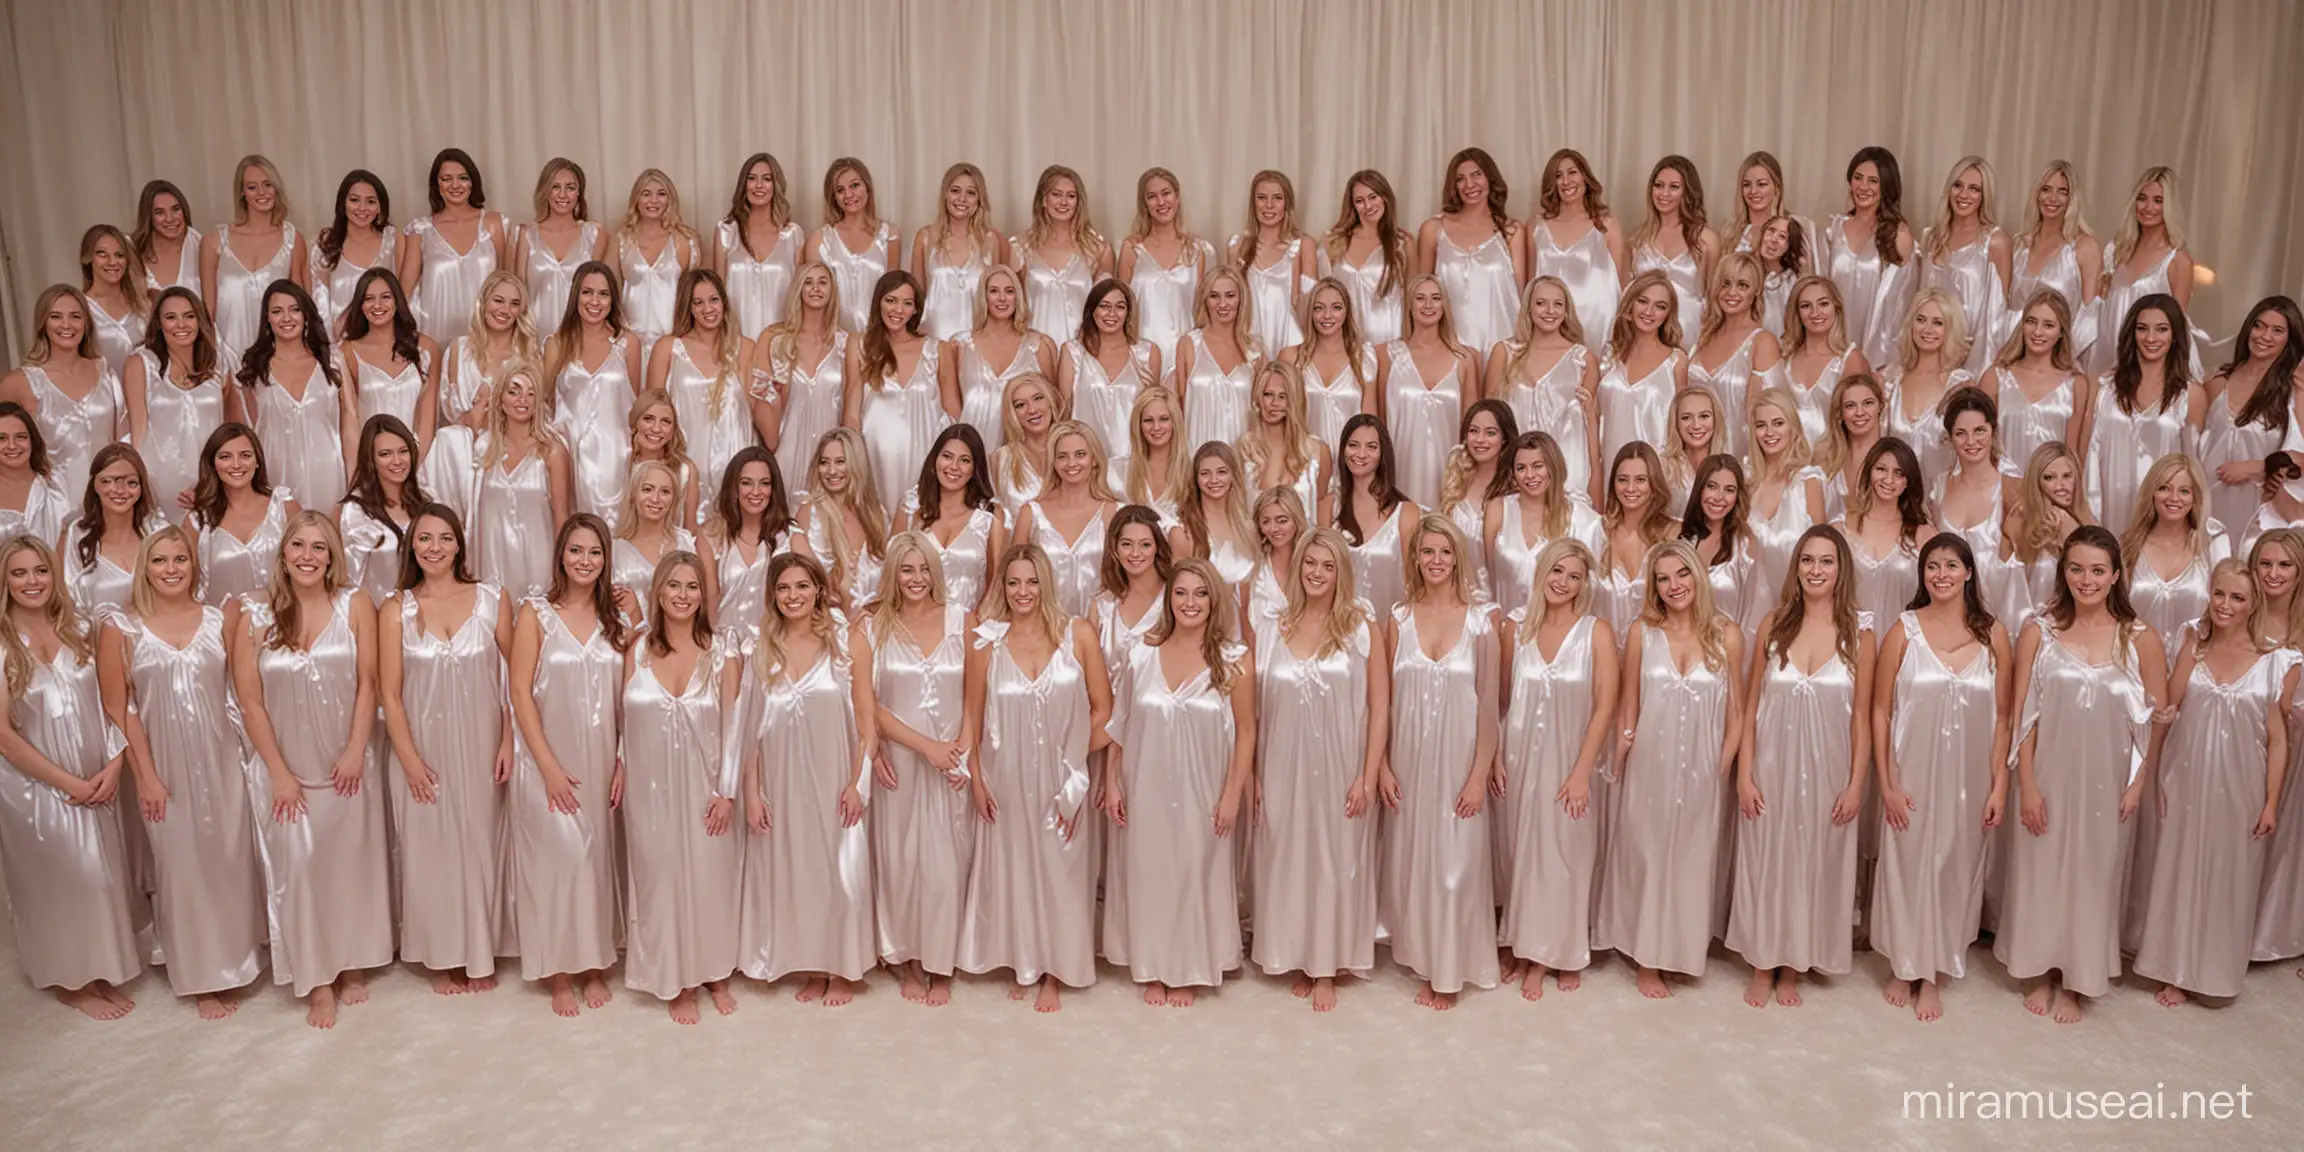 30 women in milky satin nightgowns stand in 10 rows on a huge satin bed look you